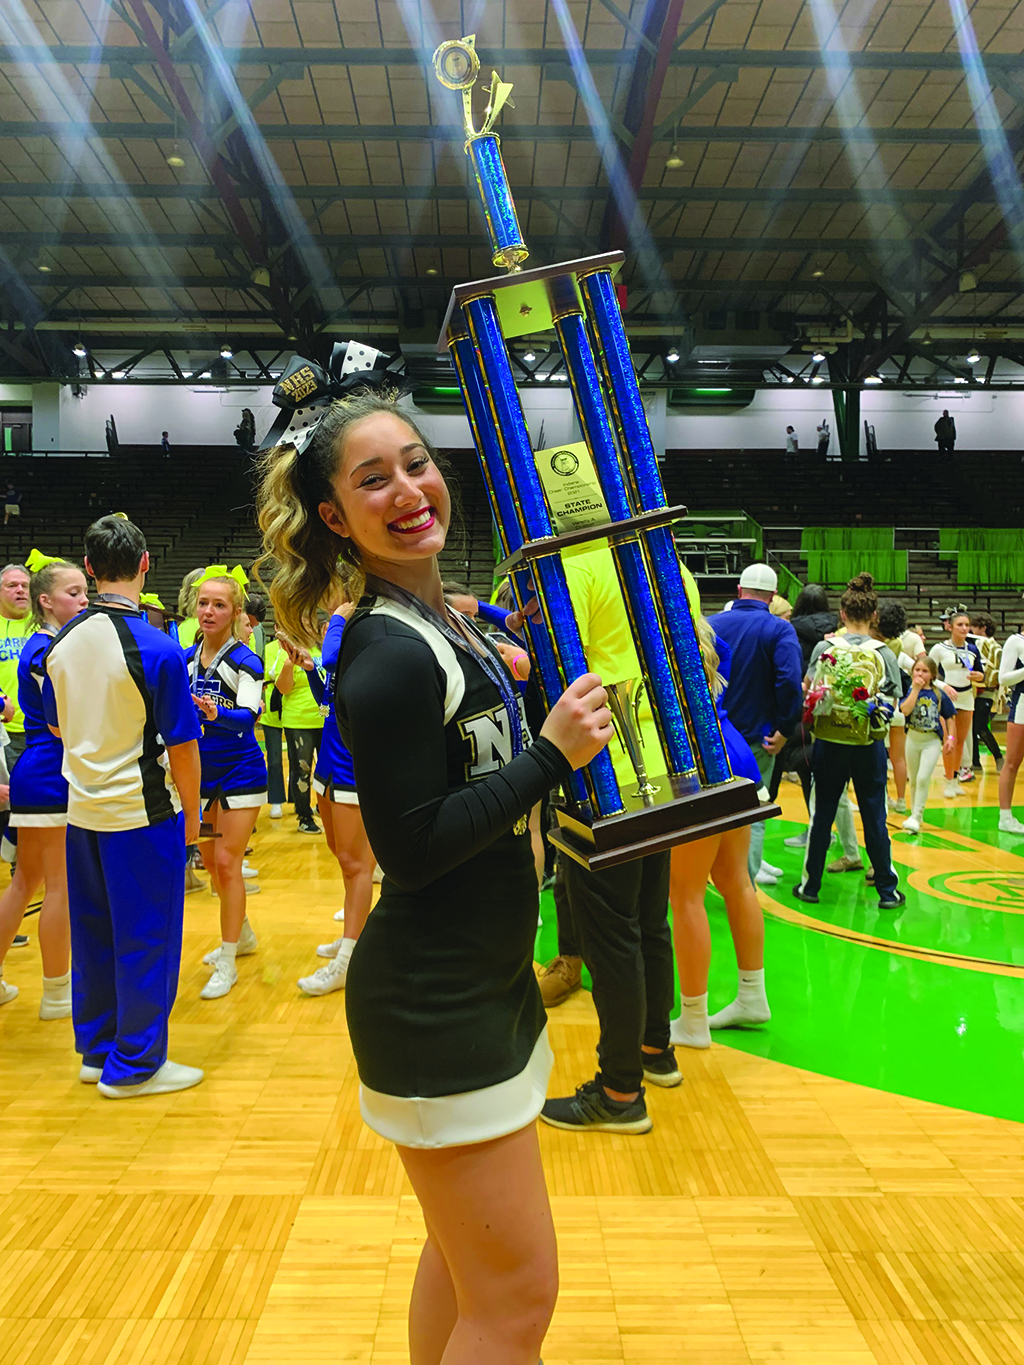 Bring it on: NHS cheerleader Lyza Saunders shares her motivations behind the teams state win